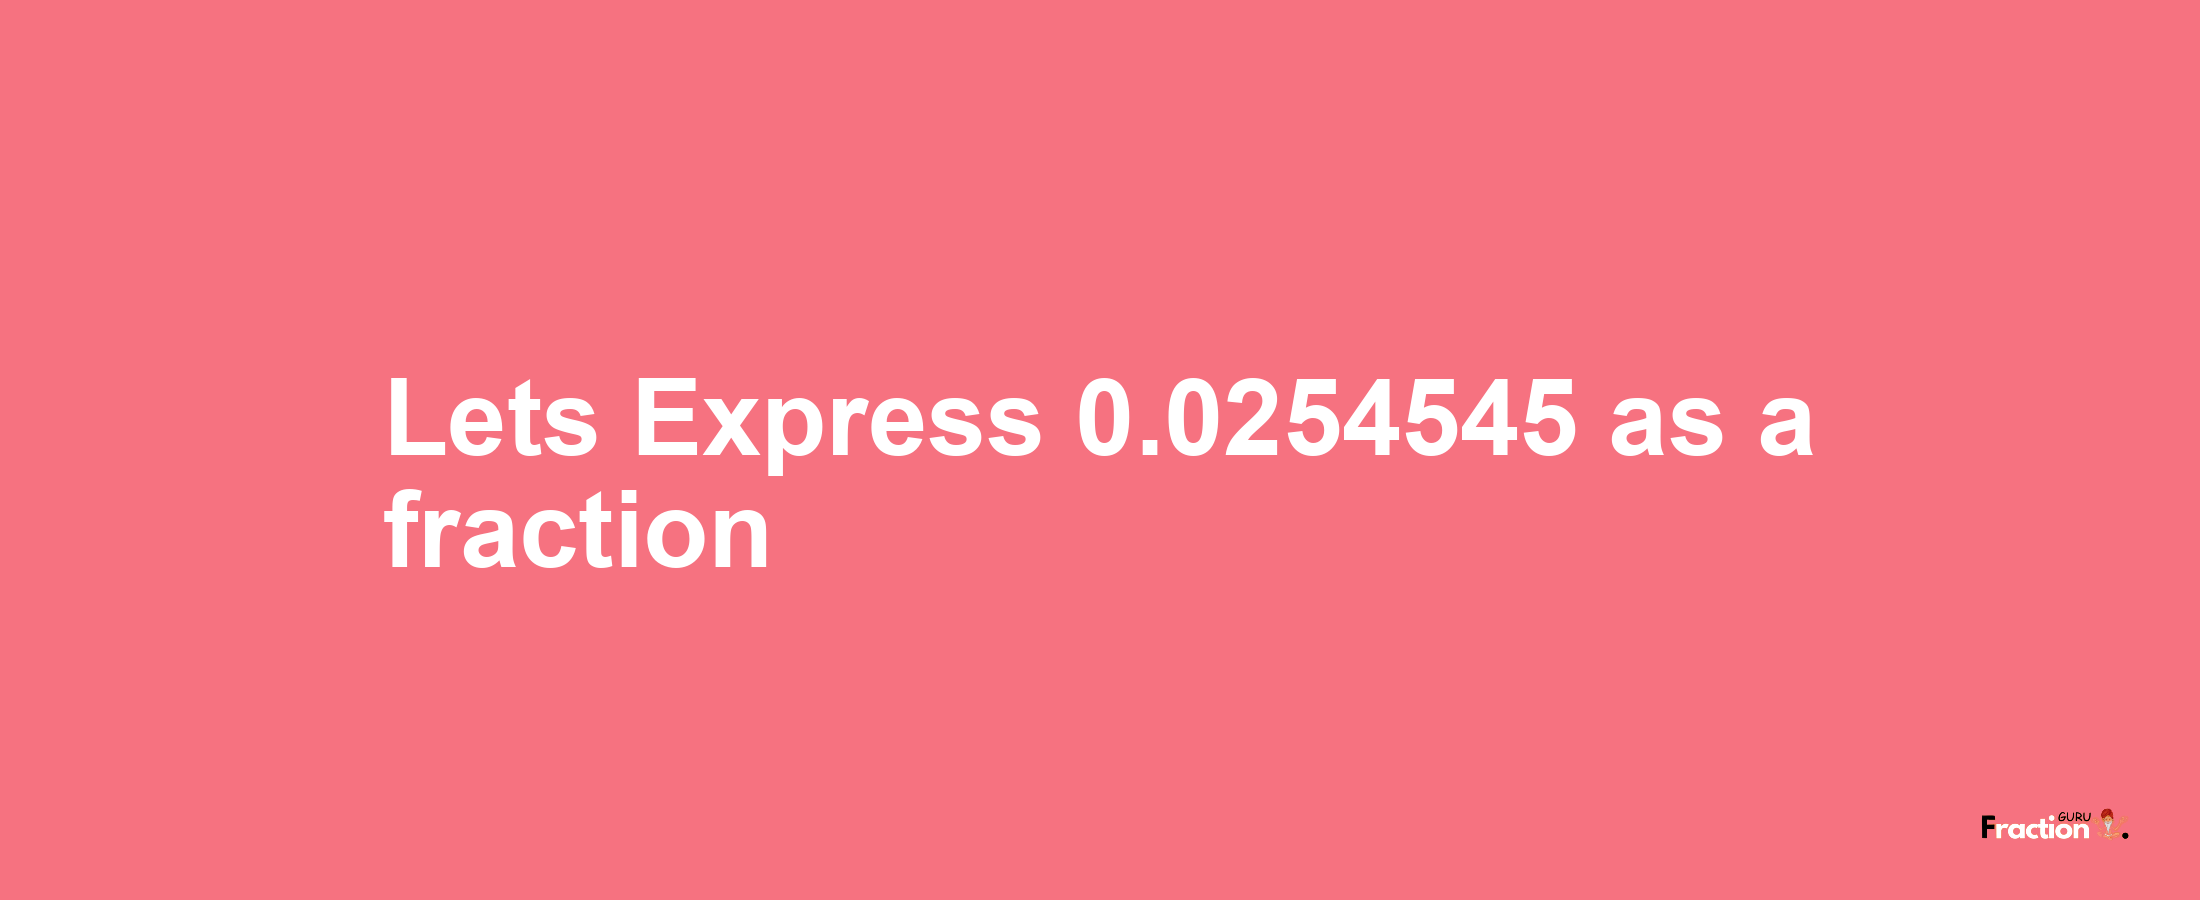 Lets Express 0.0254545 as afraction